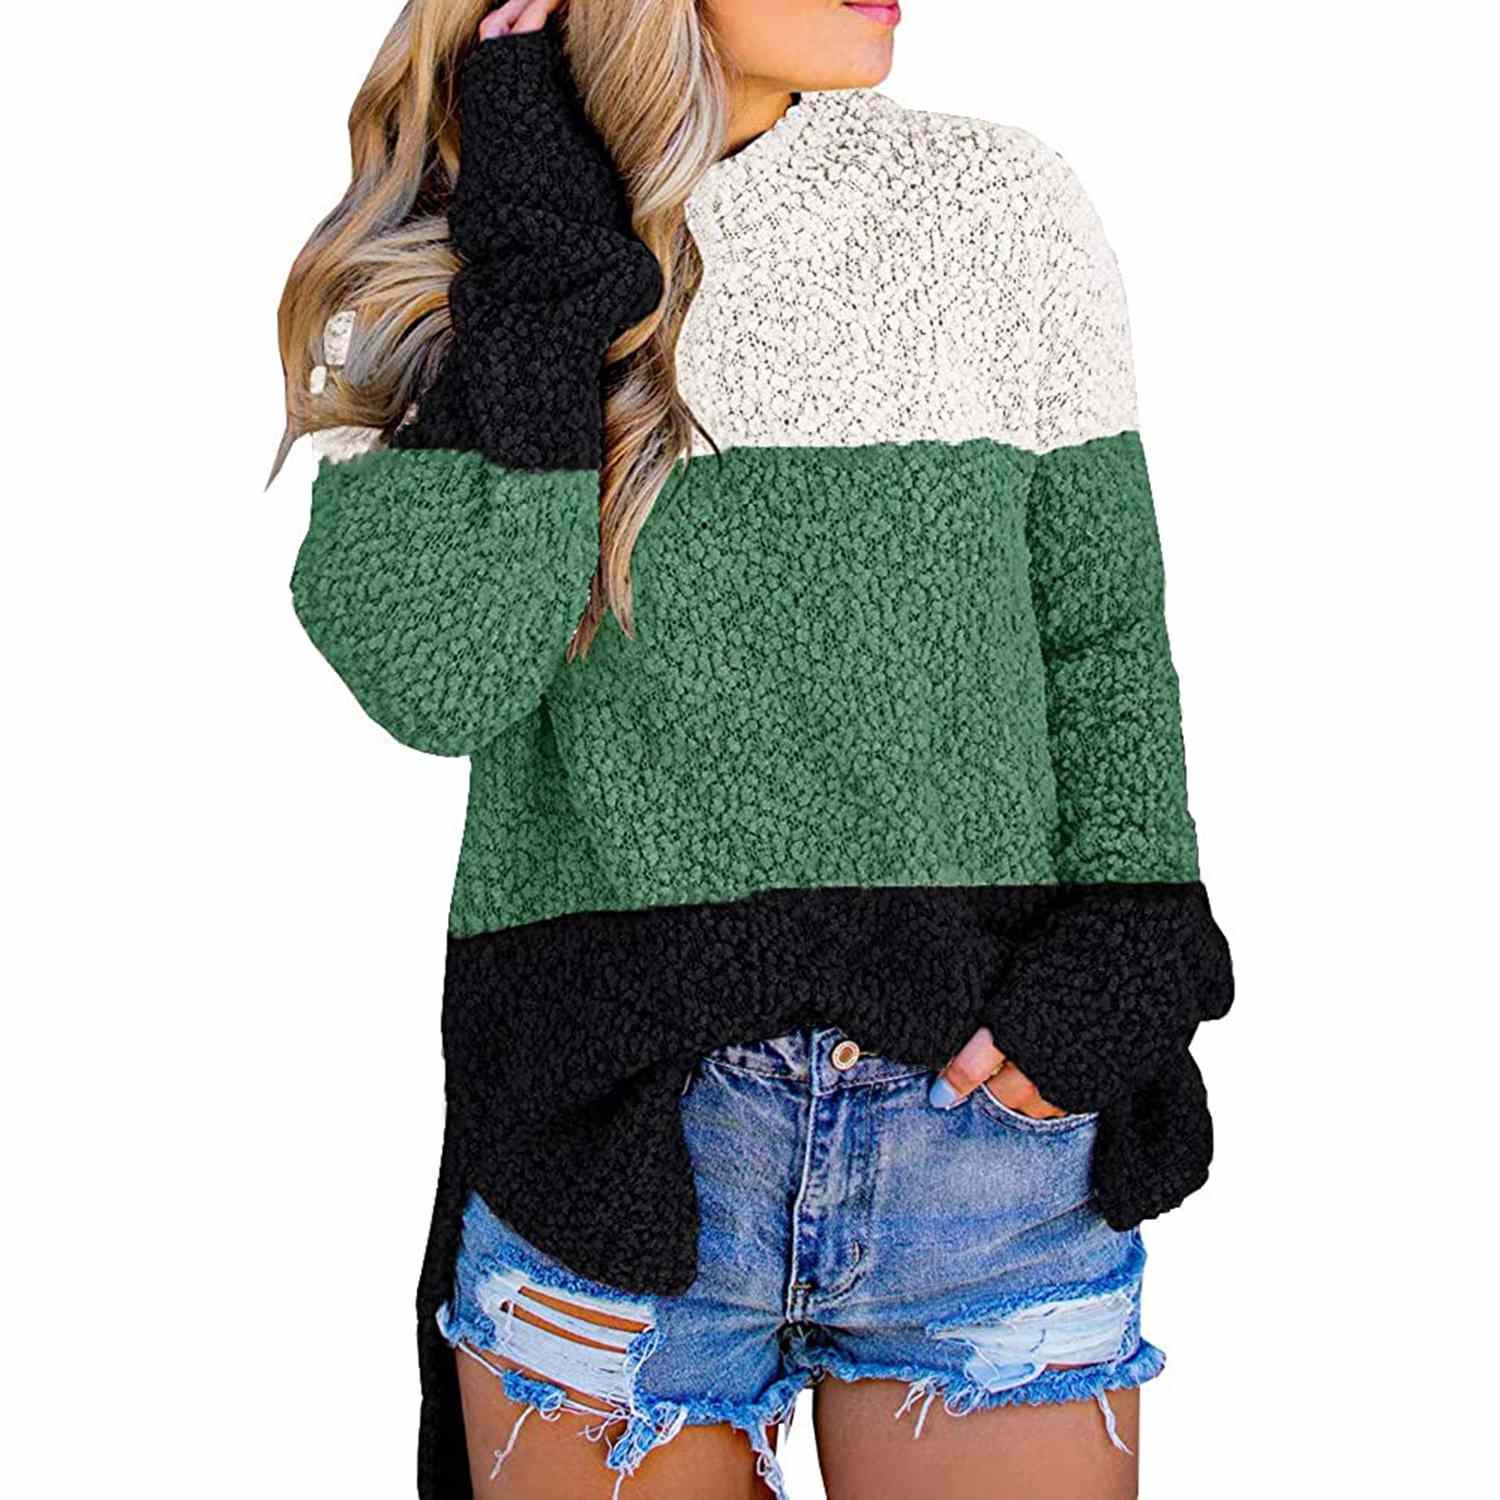 Imily Bela Womens Fuzzy Knitted Sweater Sherpa Fleece in White, Green, and Black